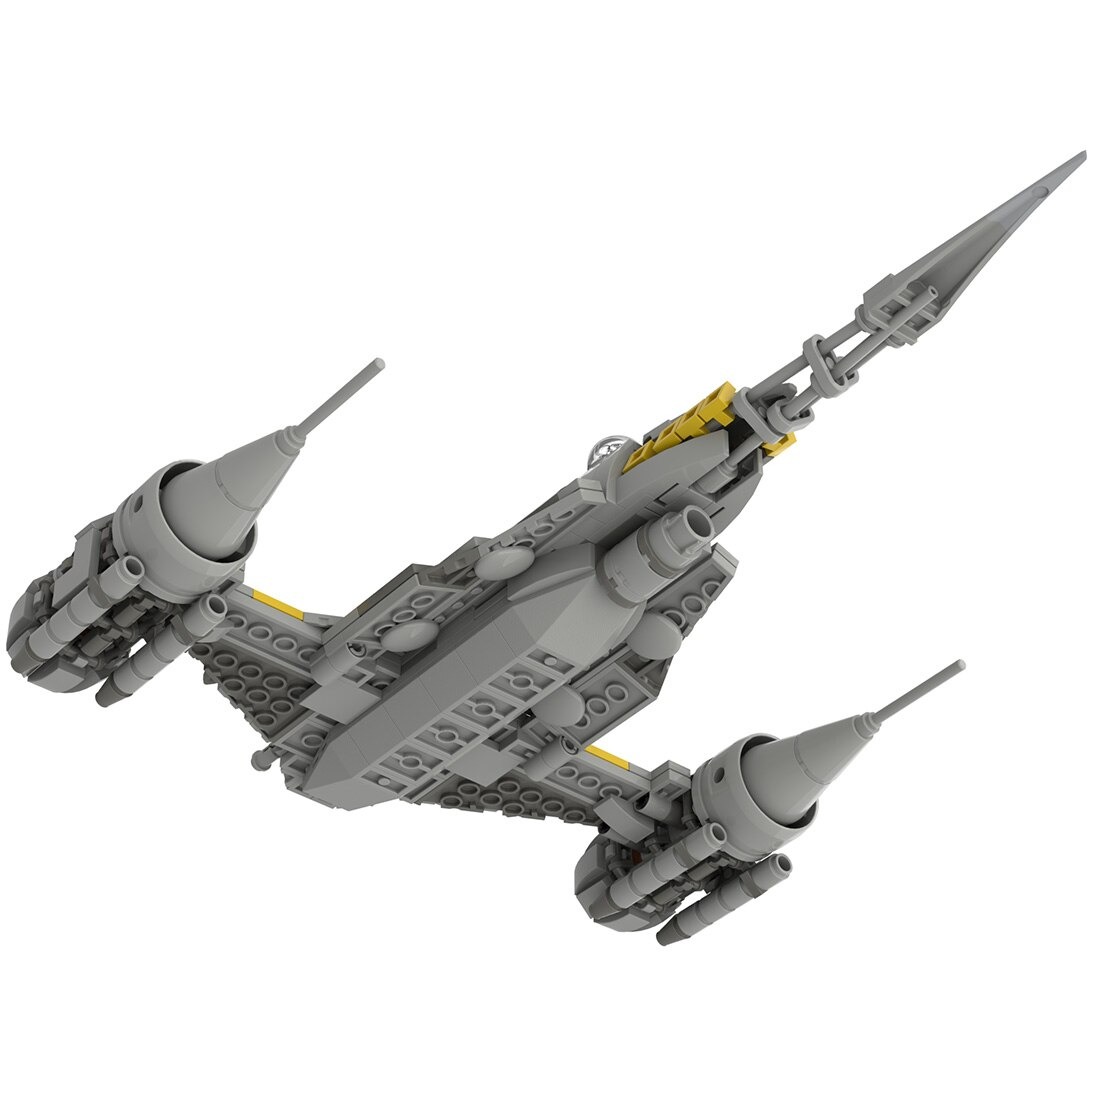 authorized moc 100546 n 1 starfighter bui main 3 1 - DECOOL